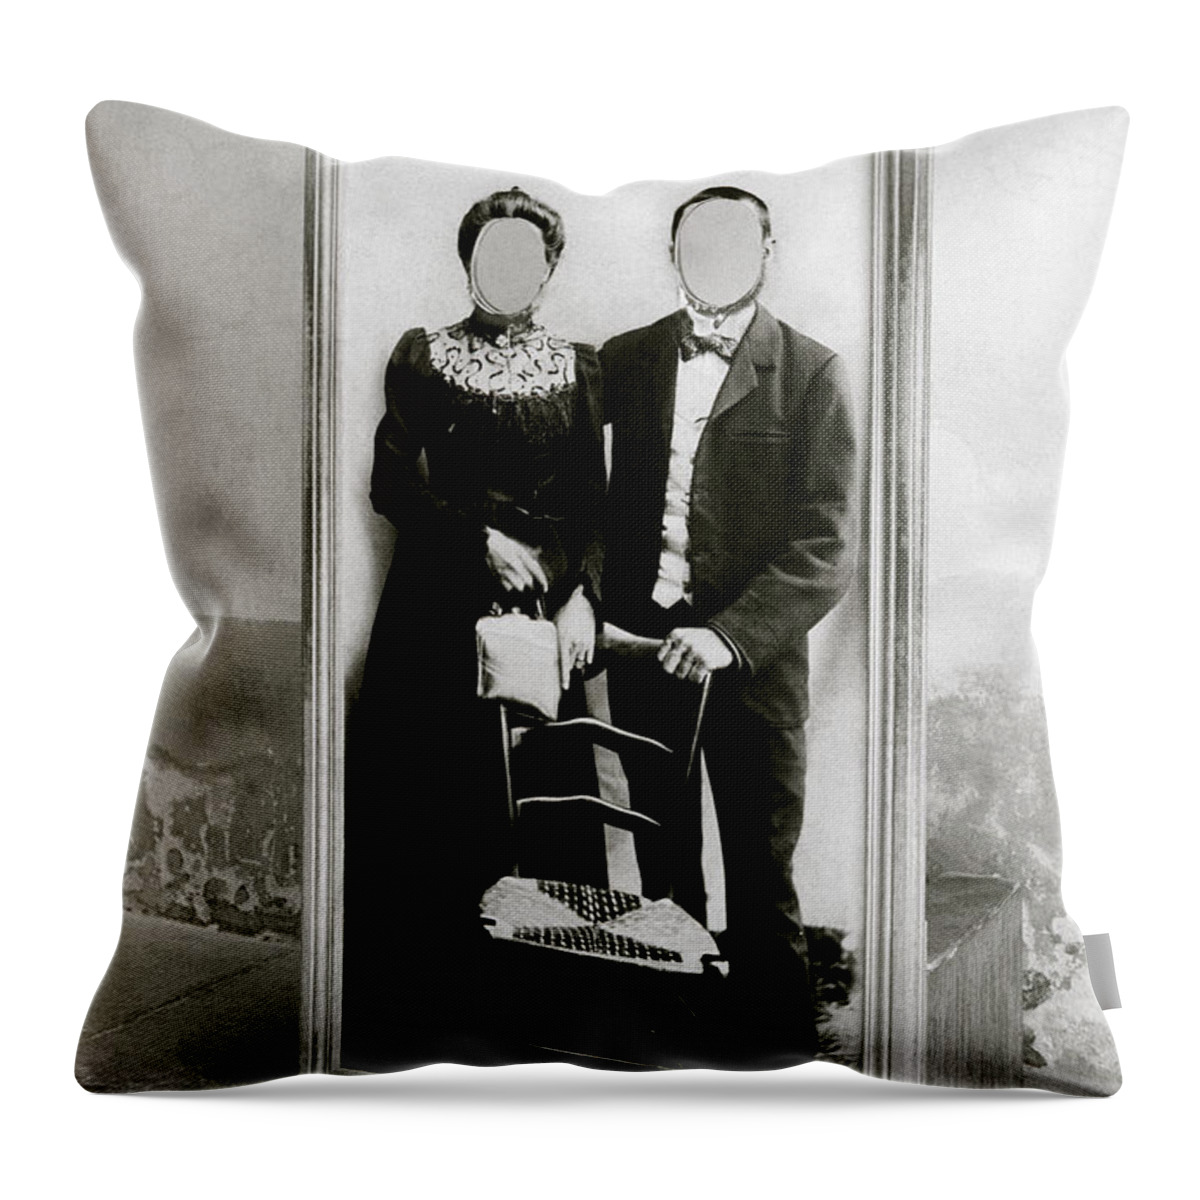 Surreal Throw Pillow featuring the photograph Surrealism In Provence by Shaun Higson